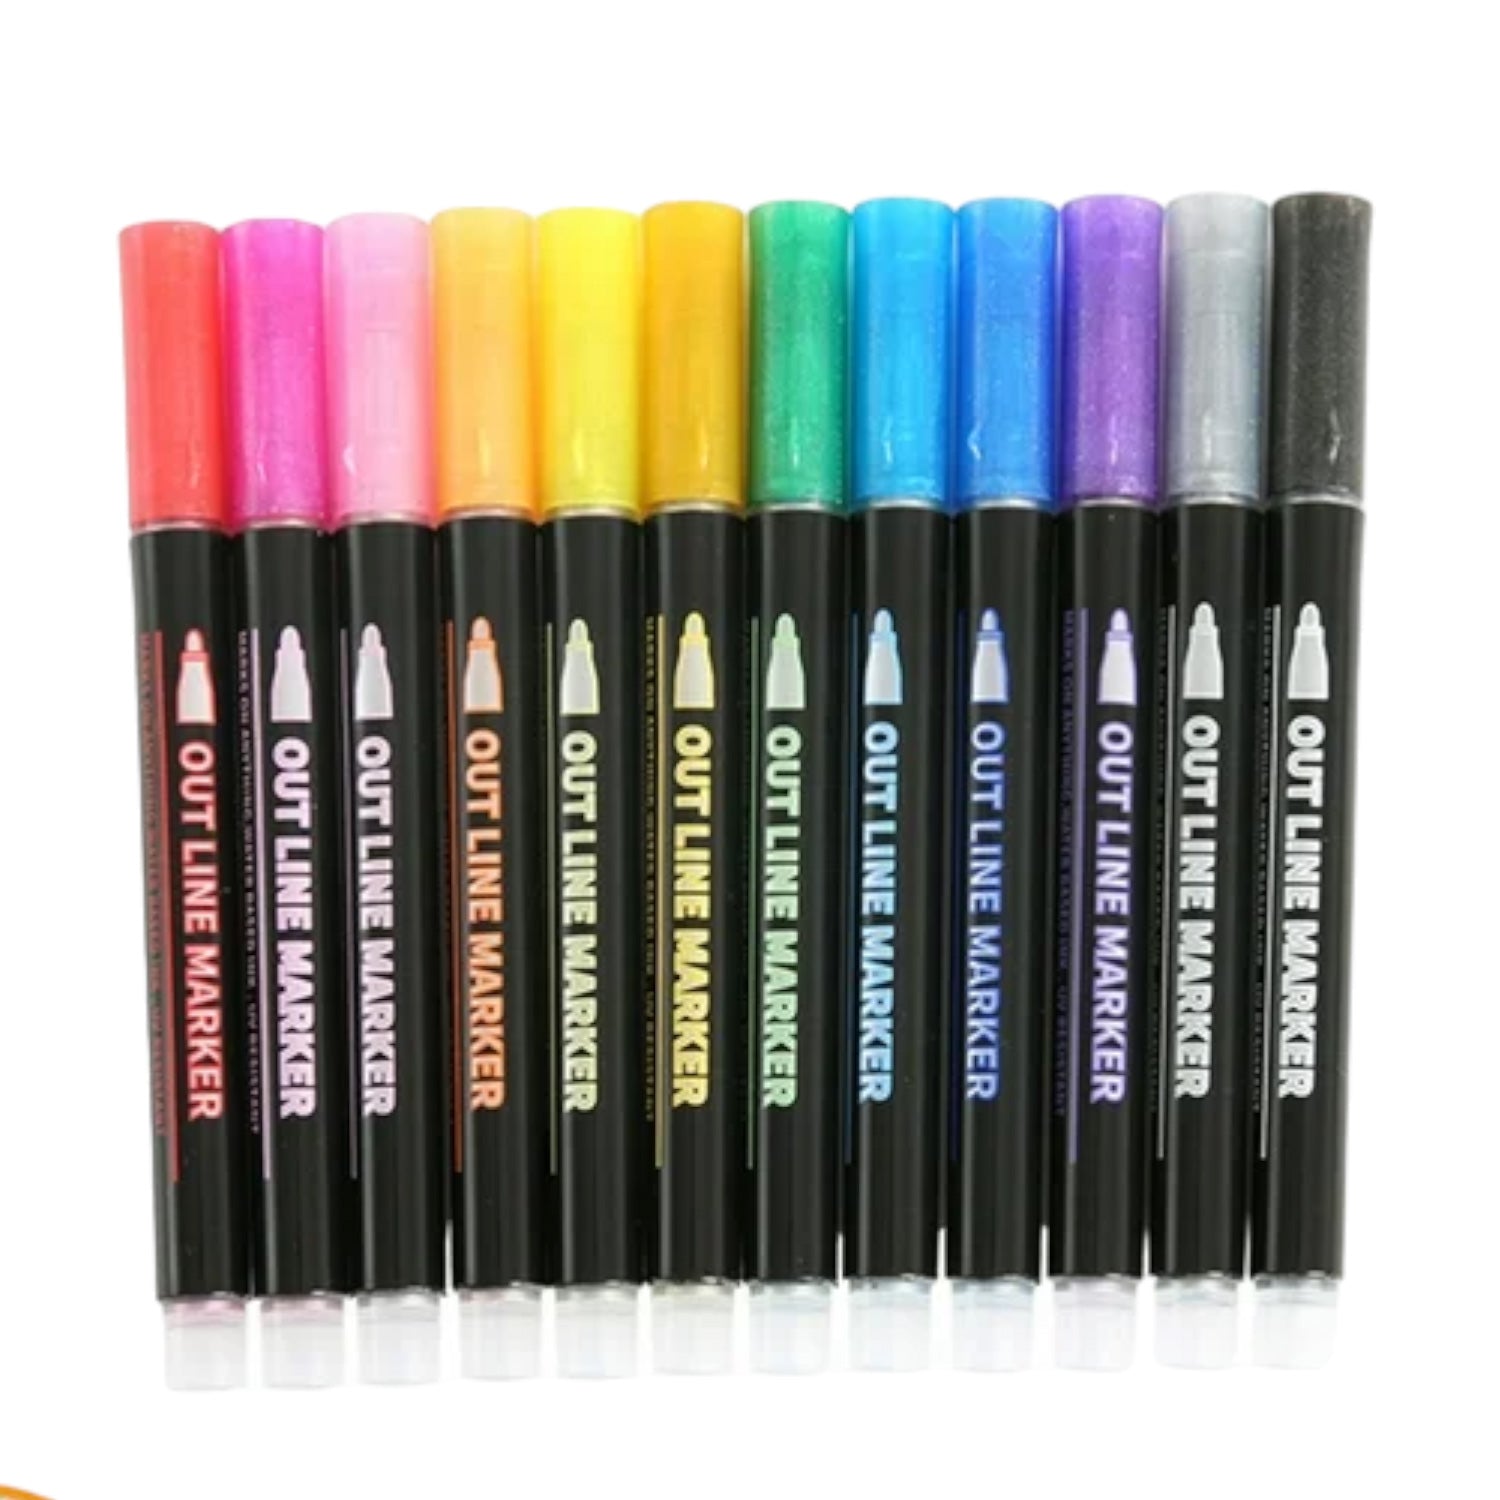 Marker Highlighters Pen | Out Line Pens in 12 Colors - for Girls, Boys, School, Crafts, Drawing, Birthday Gift & Return Gifts - Apkamart #Style_pack of 1